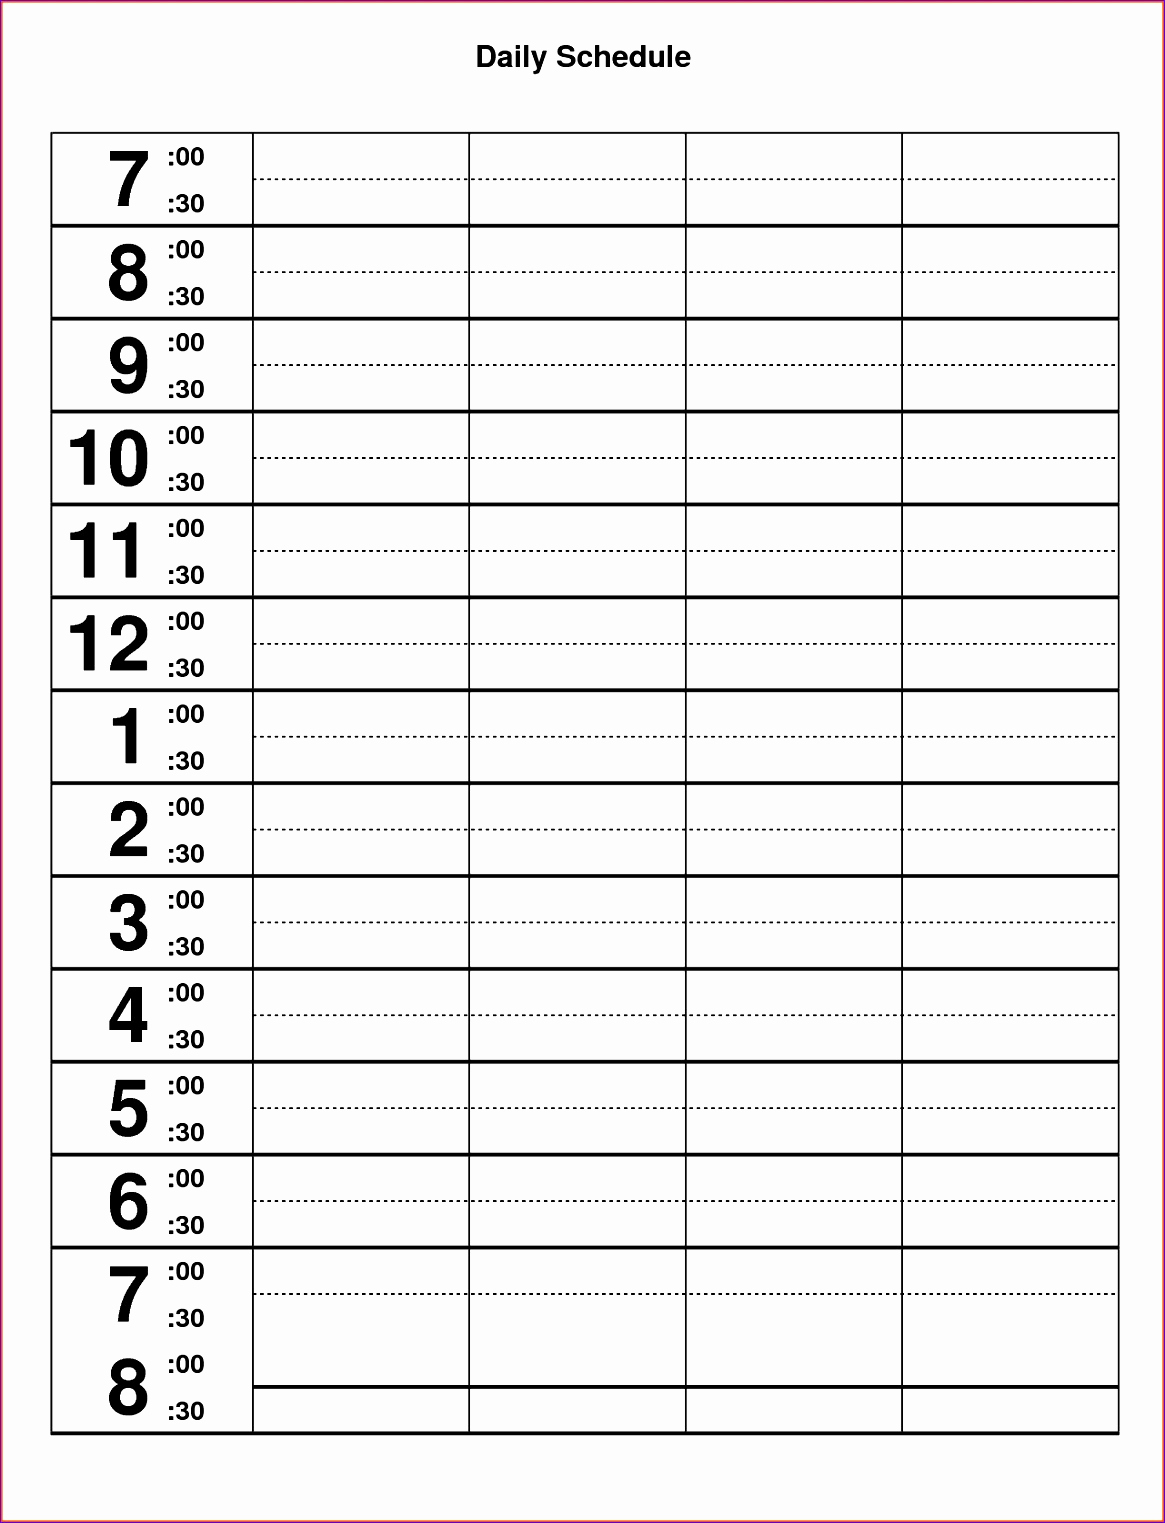 Weekly Hourly Schedule Template Fresh 10 Excel Hourly Schedule Template Exceltemplates